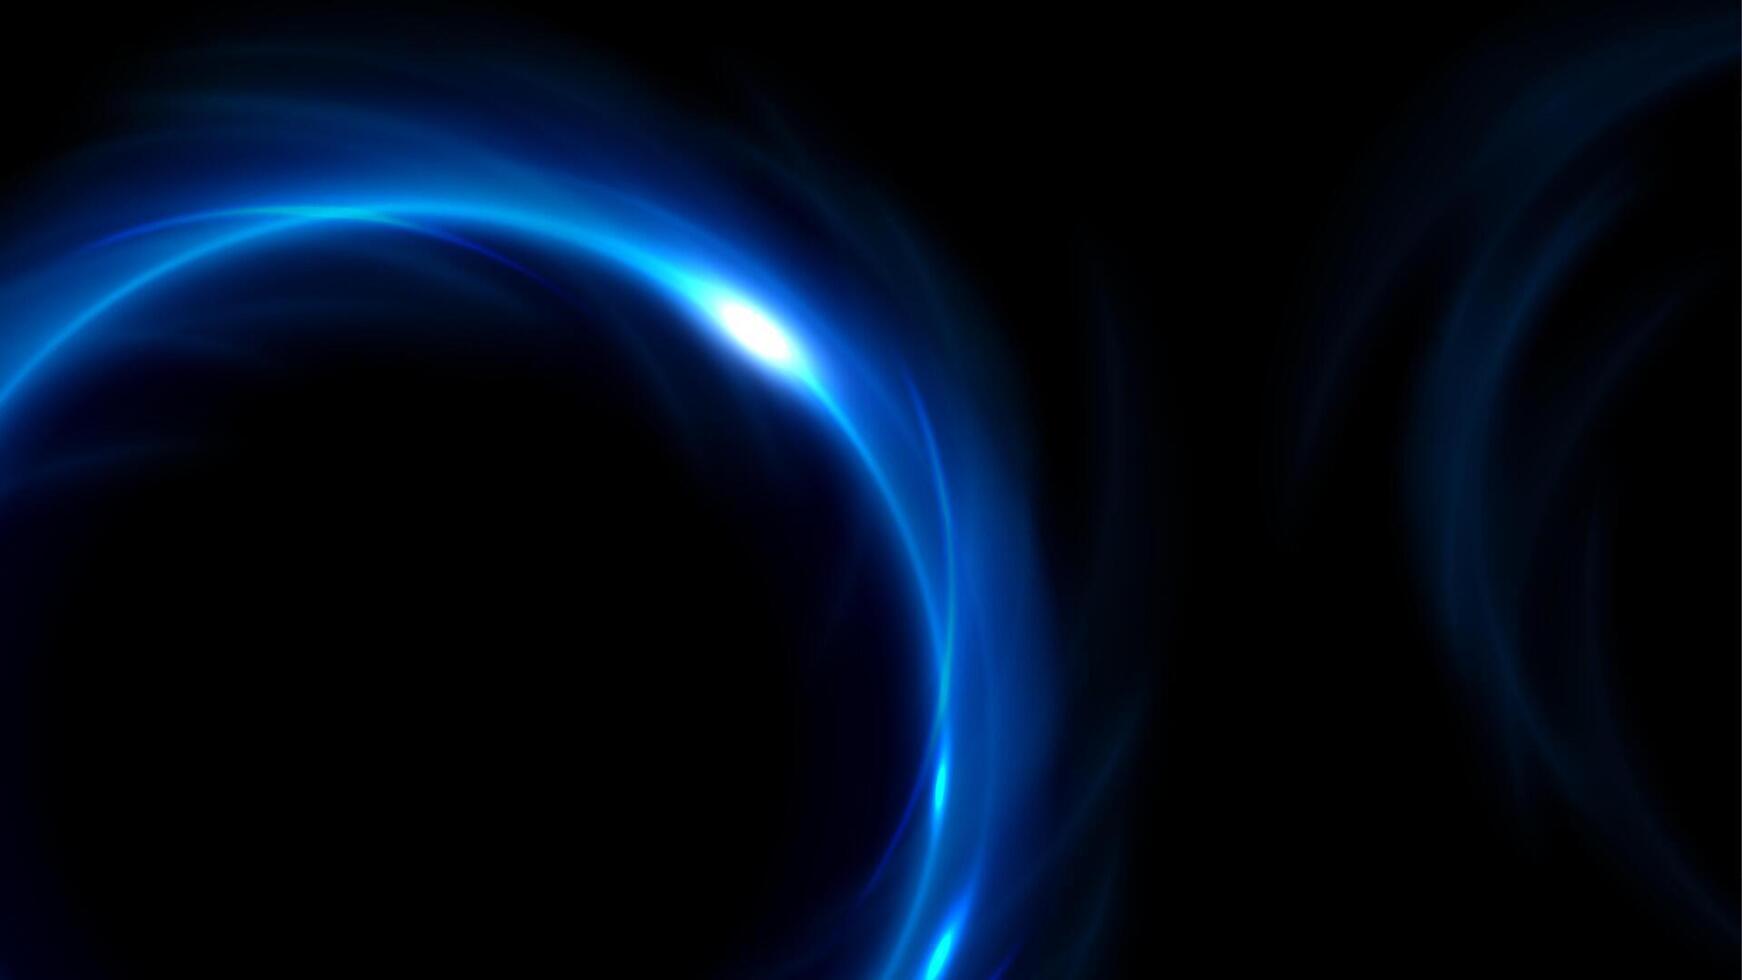 Blue Light Twisted in Widescreen, Vector Illustration